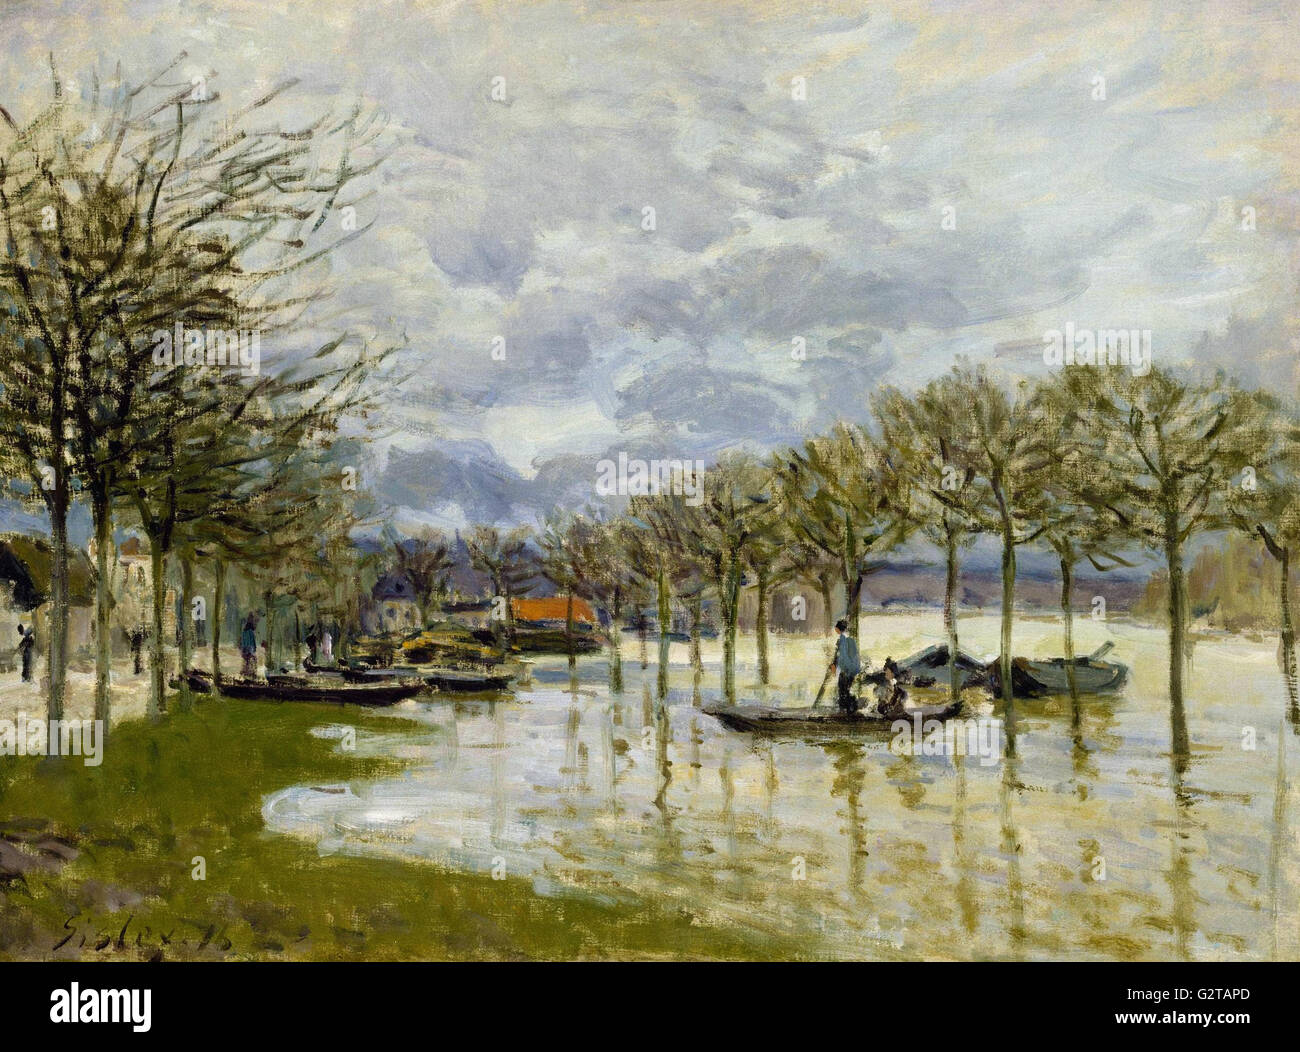 Alfred Sisley - The Flood on the Road to Saint-Germain - Stock Photo